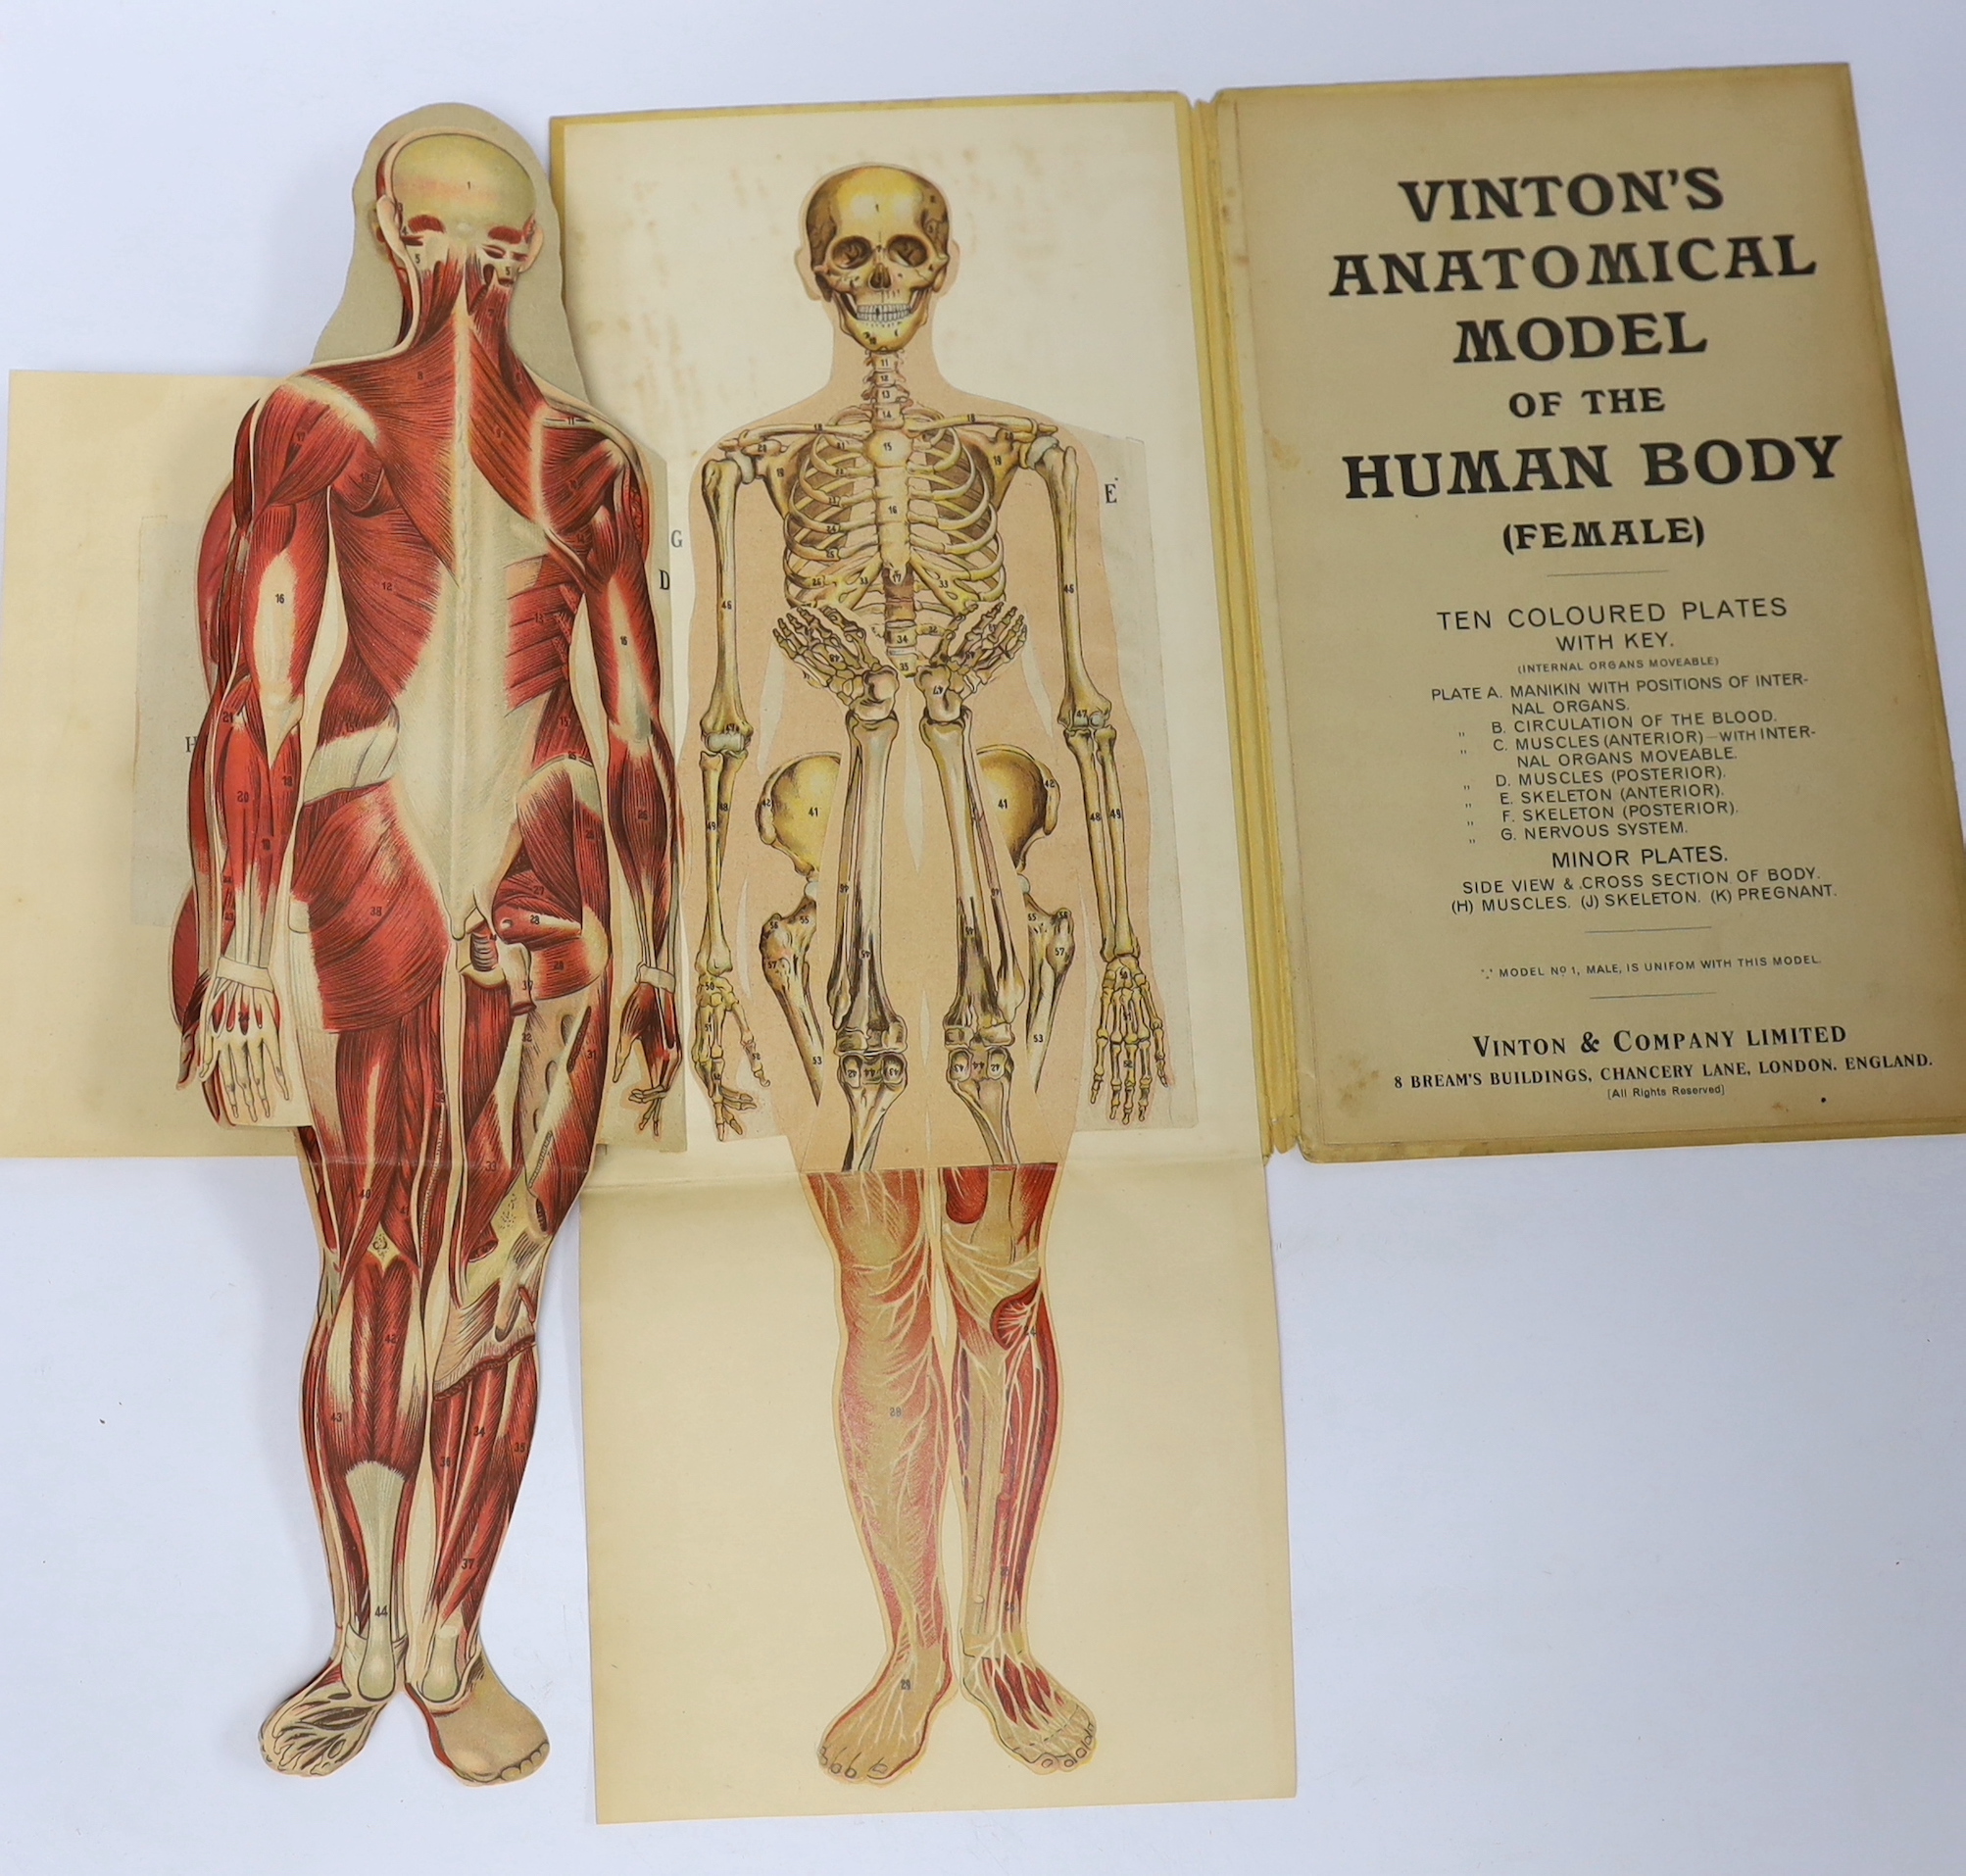 A Vinton's Anatomical Model of the Human Body (Female anatomy), printed in Bavaria by Vinson & Co. Ltd. circa 1910, with coloured fold-out plates, 19.5cm x 33cm